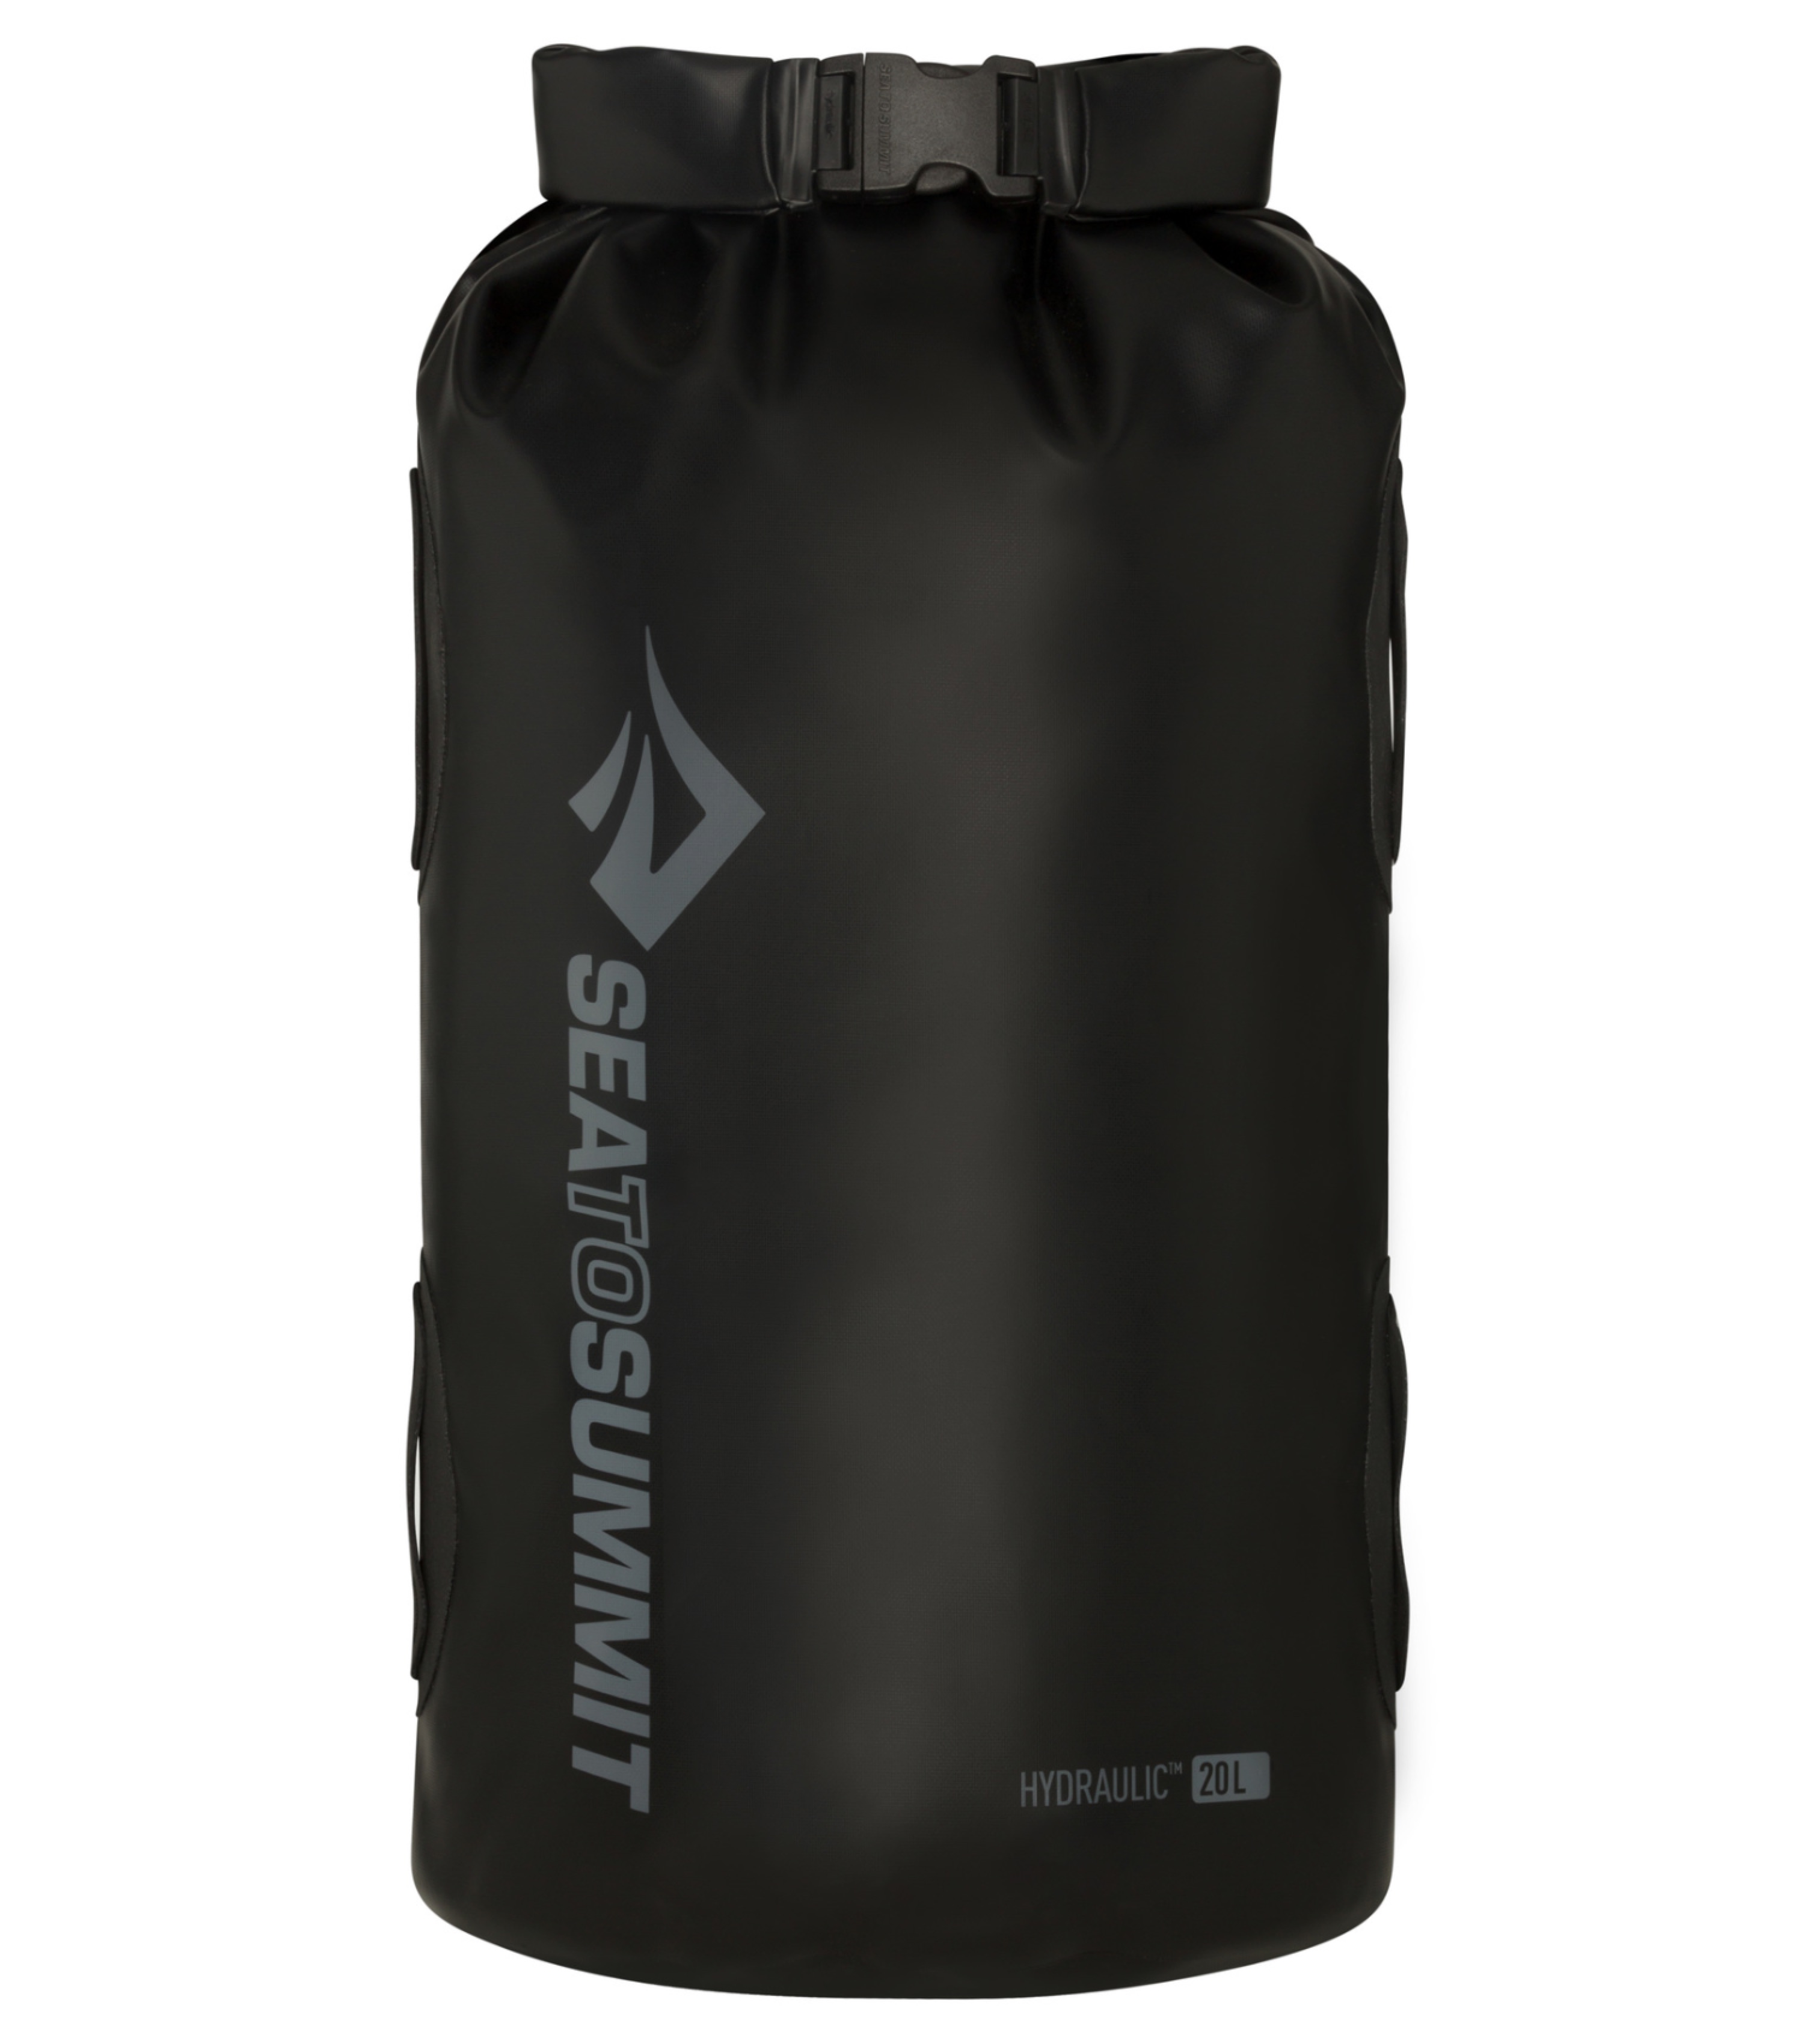 Sea to summit hydraulic packing cube as liquids bag? : r/onebag